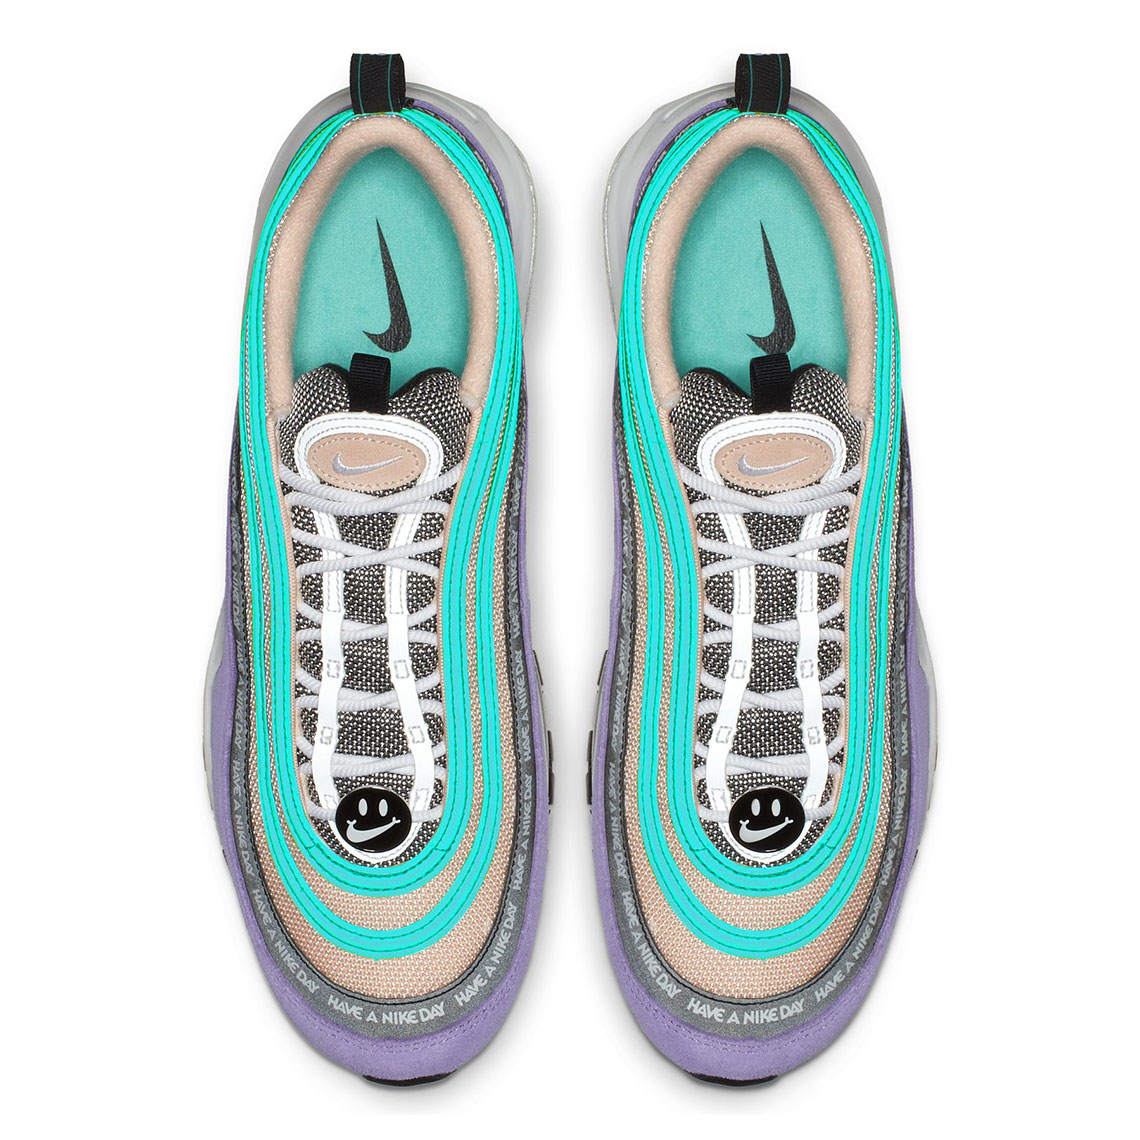 nike-air-max-97-have-a-nike-day-release-date-4.jpg